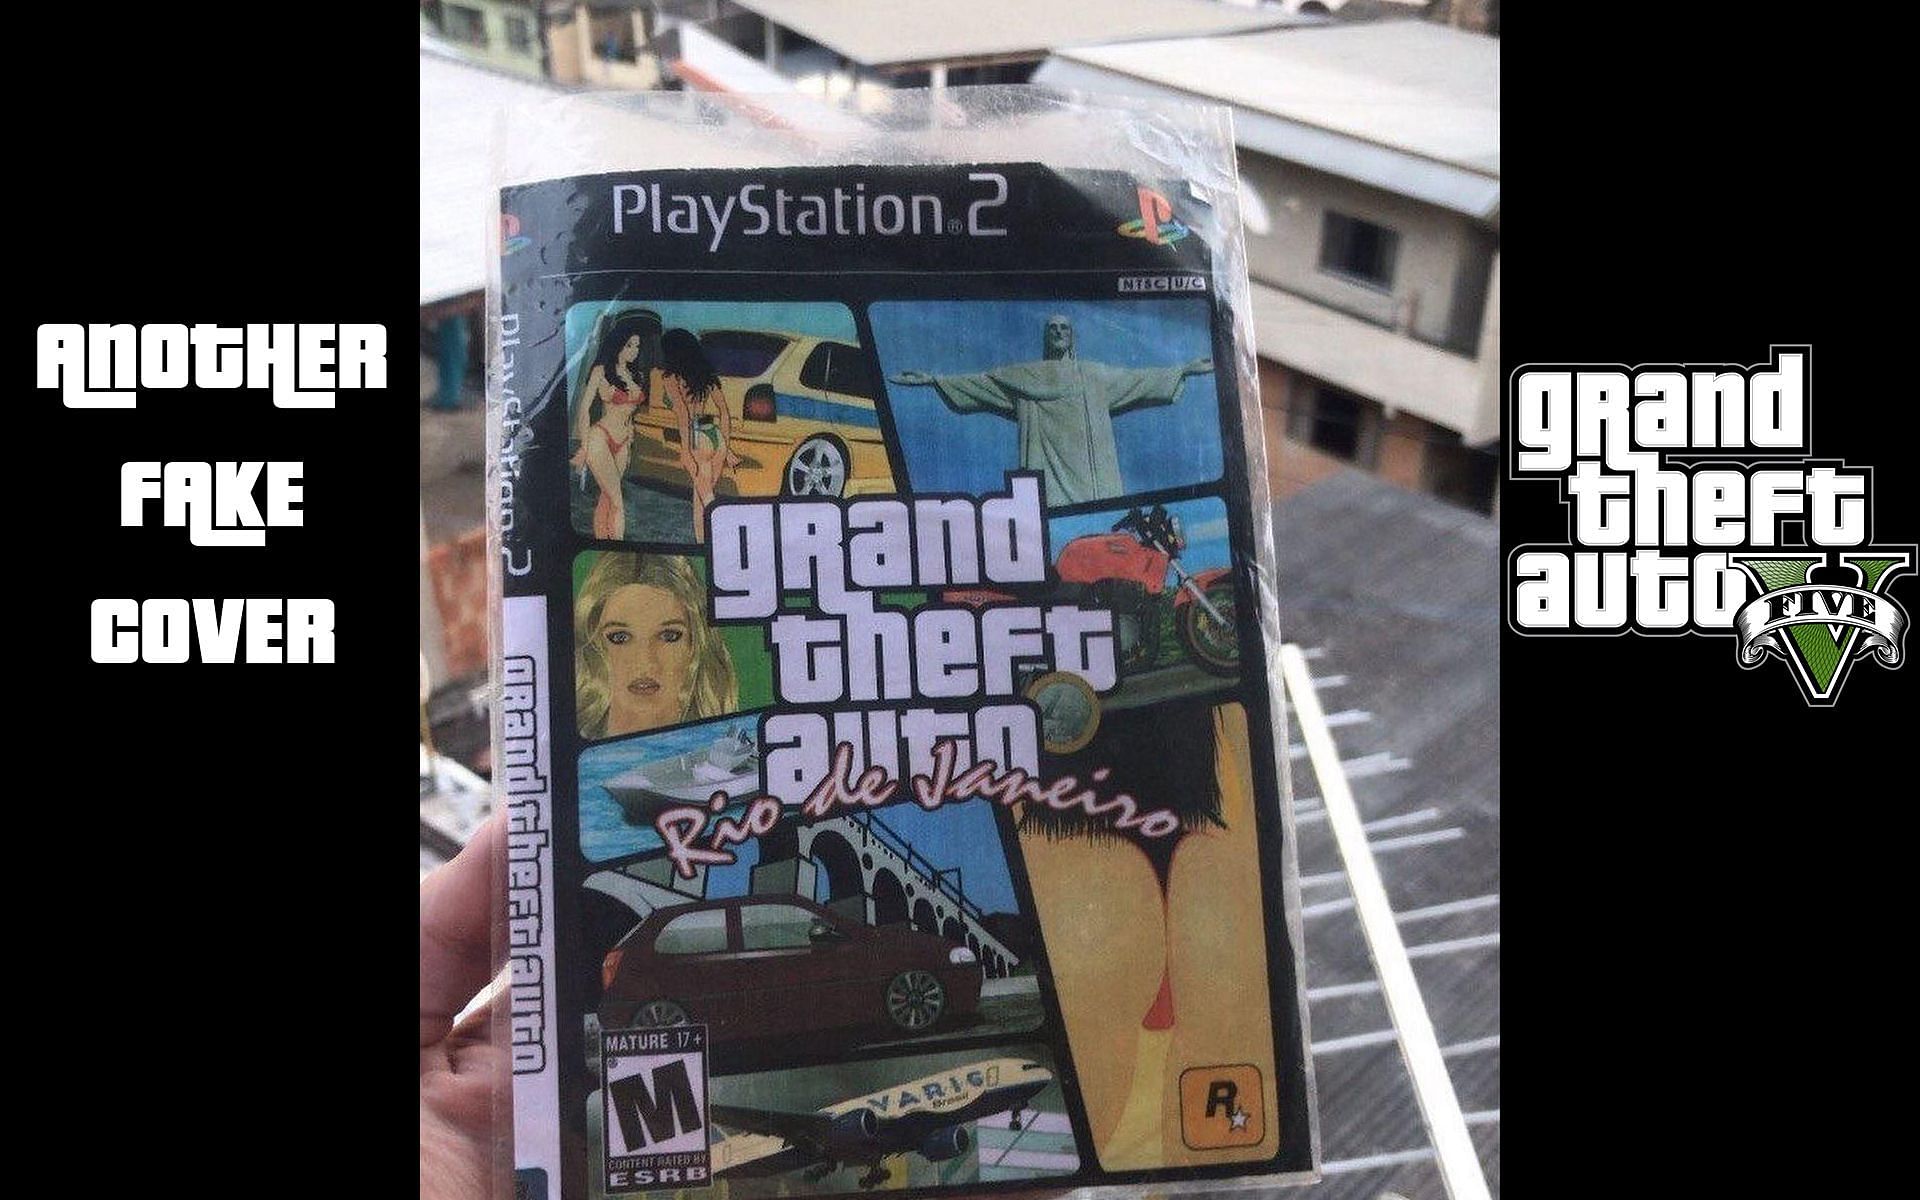 GTA Redditor discovers a fake cover for the game